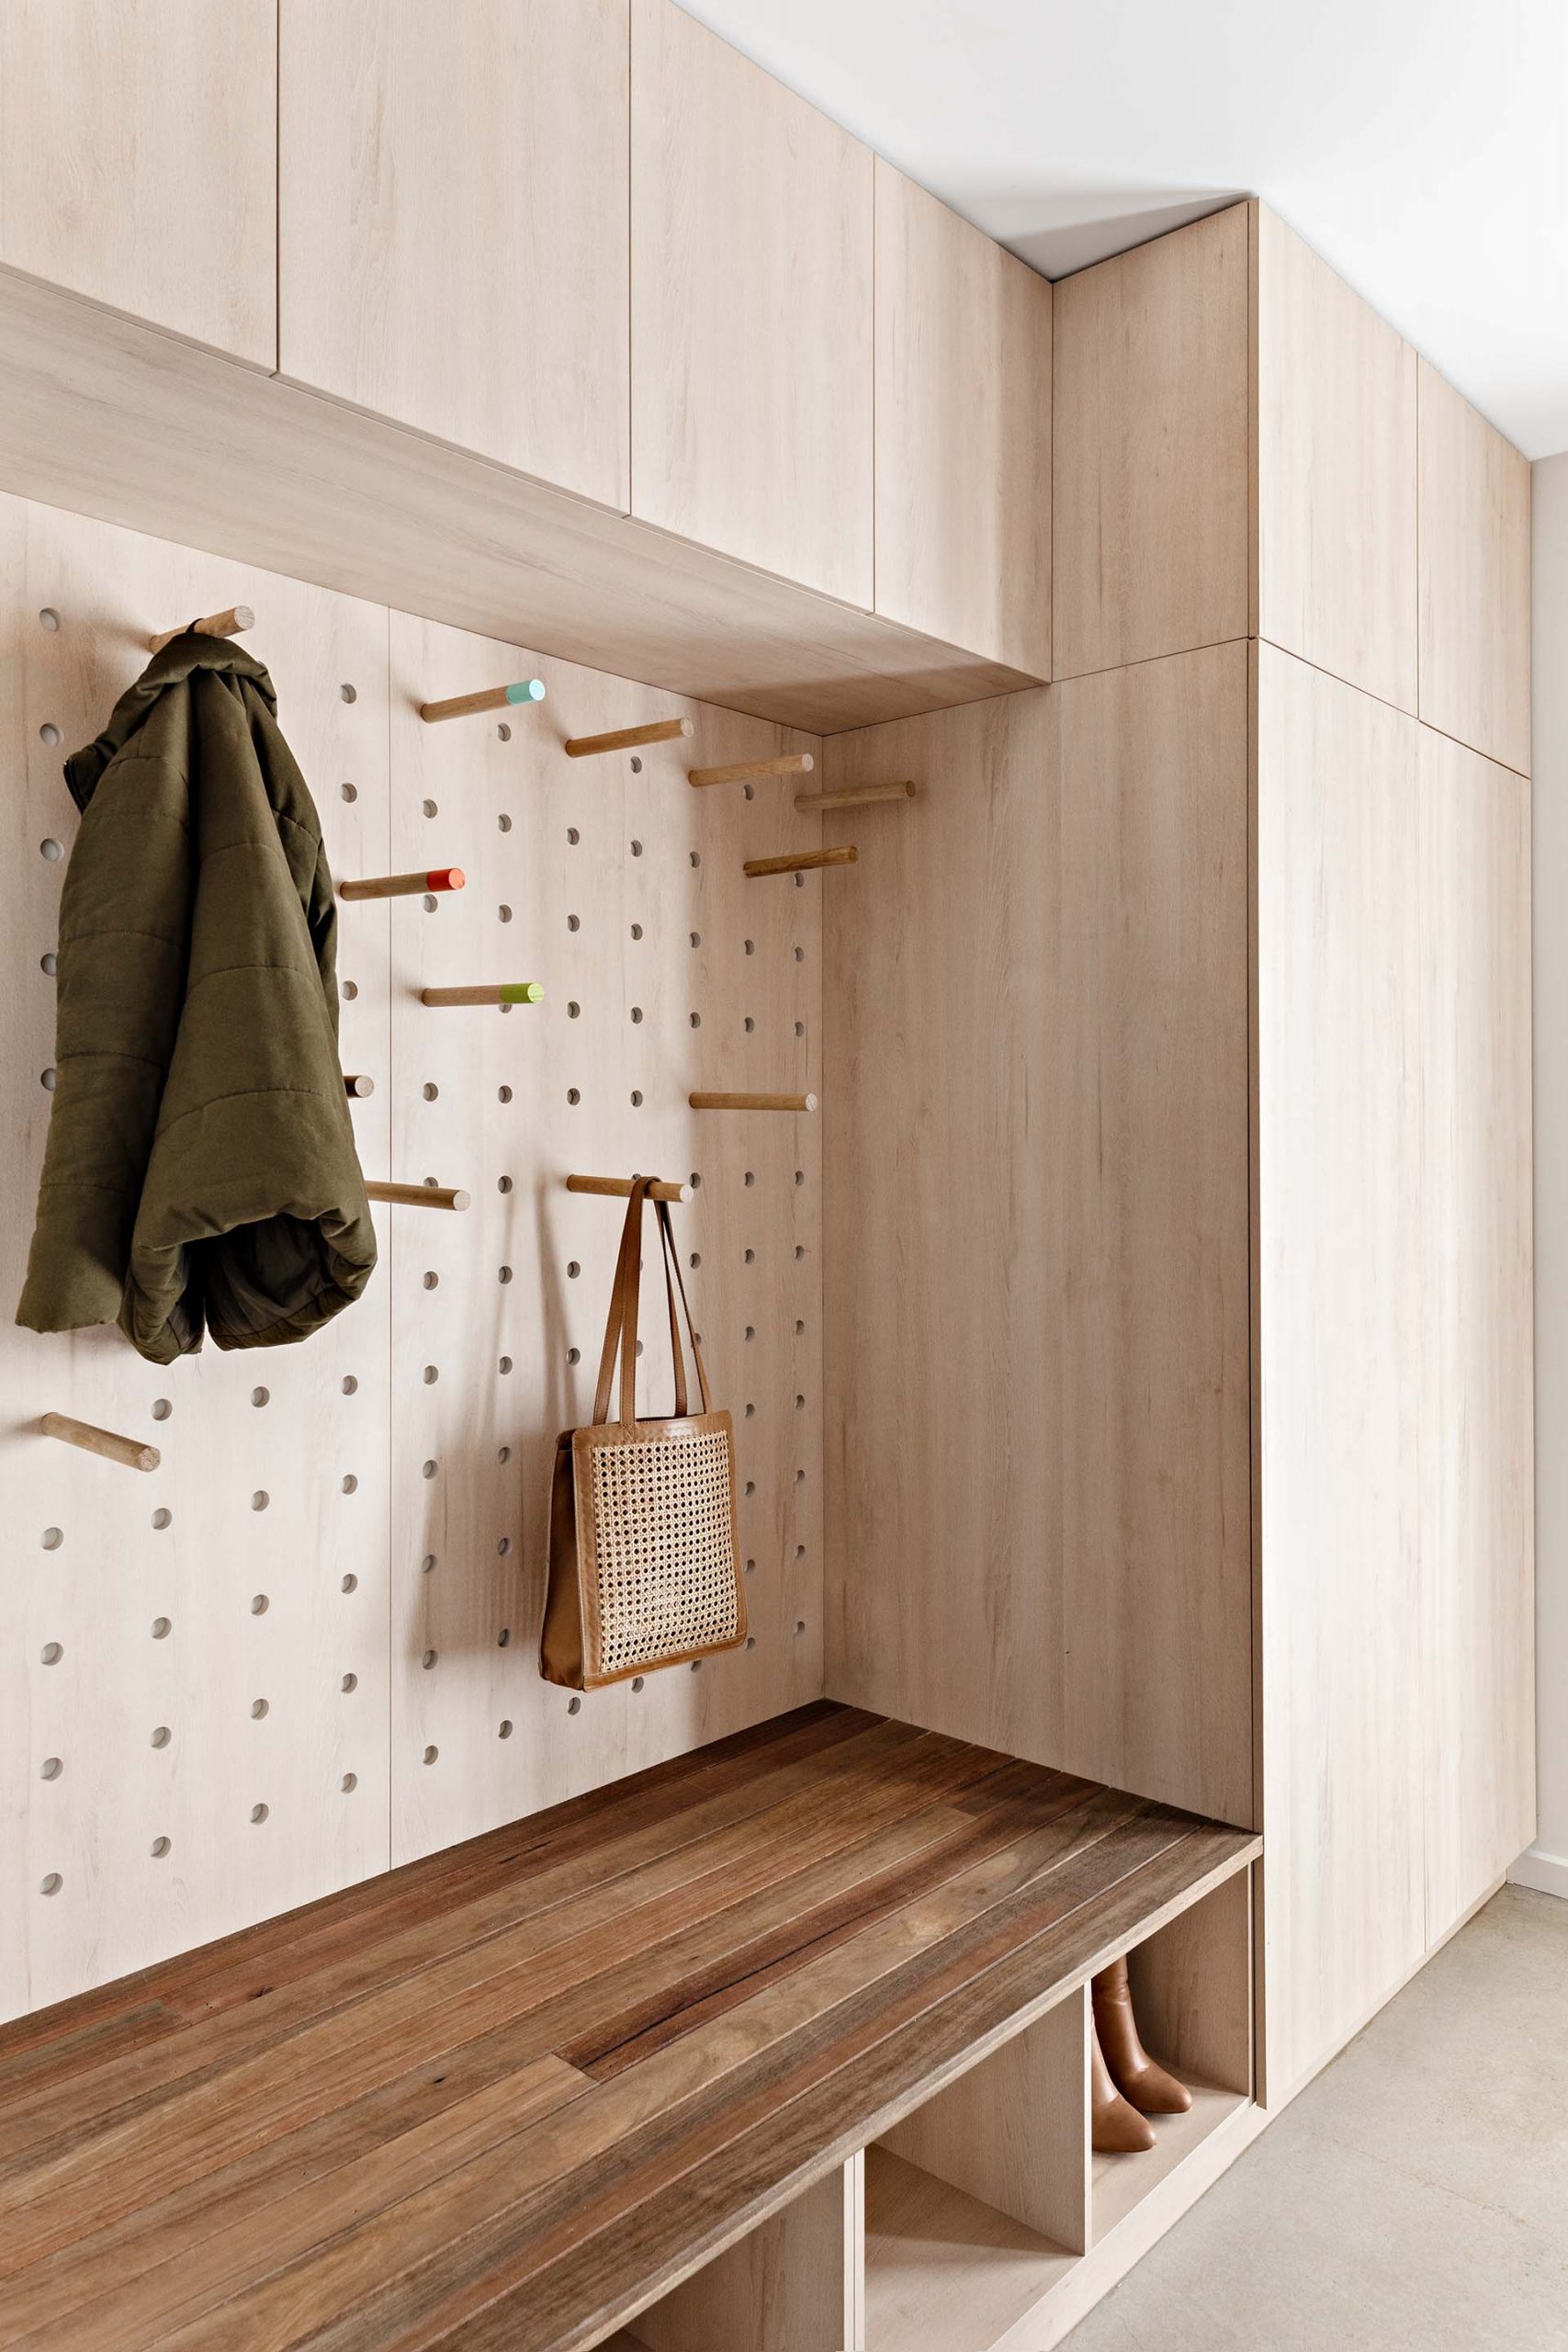 A modern mudroom / laundry room with minimalist wood cabinets, a wood bench, shoe storage, white countertop, and pegboard storage wall.